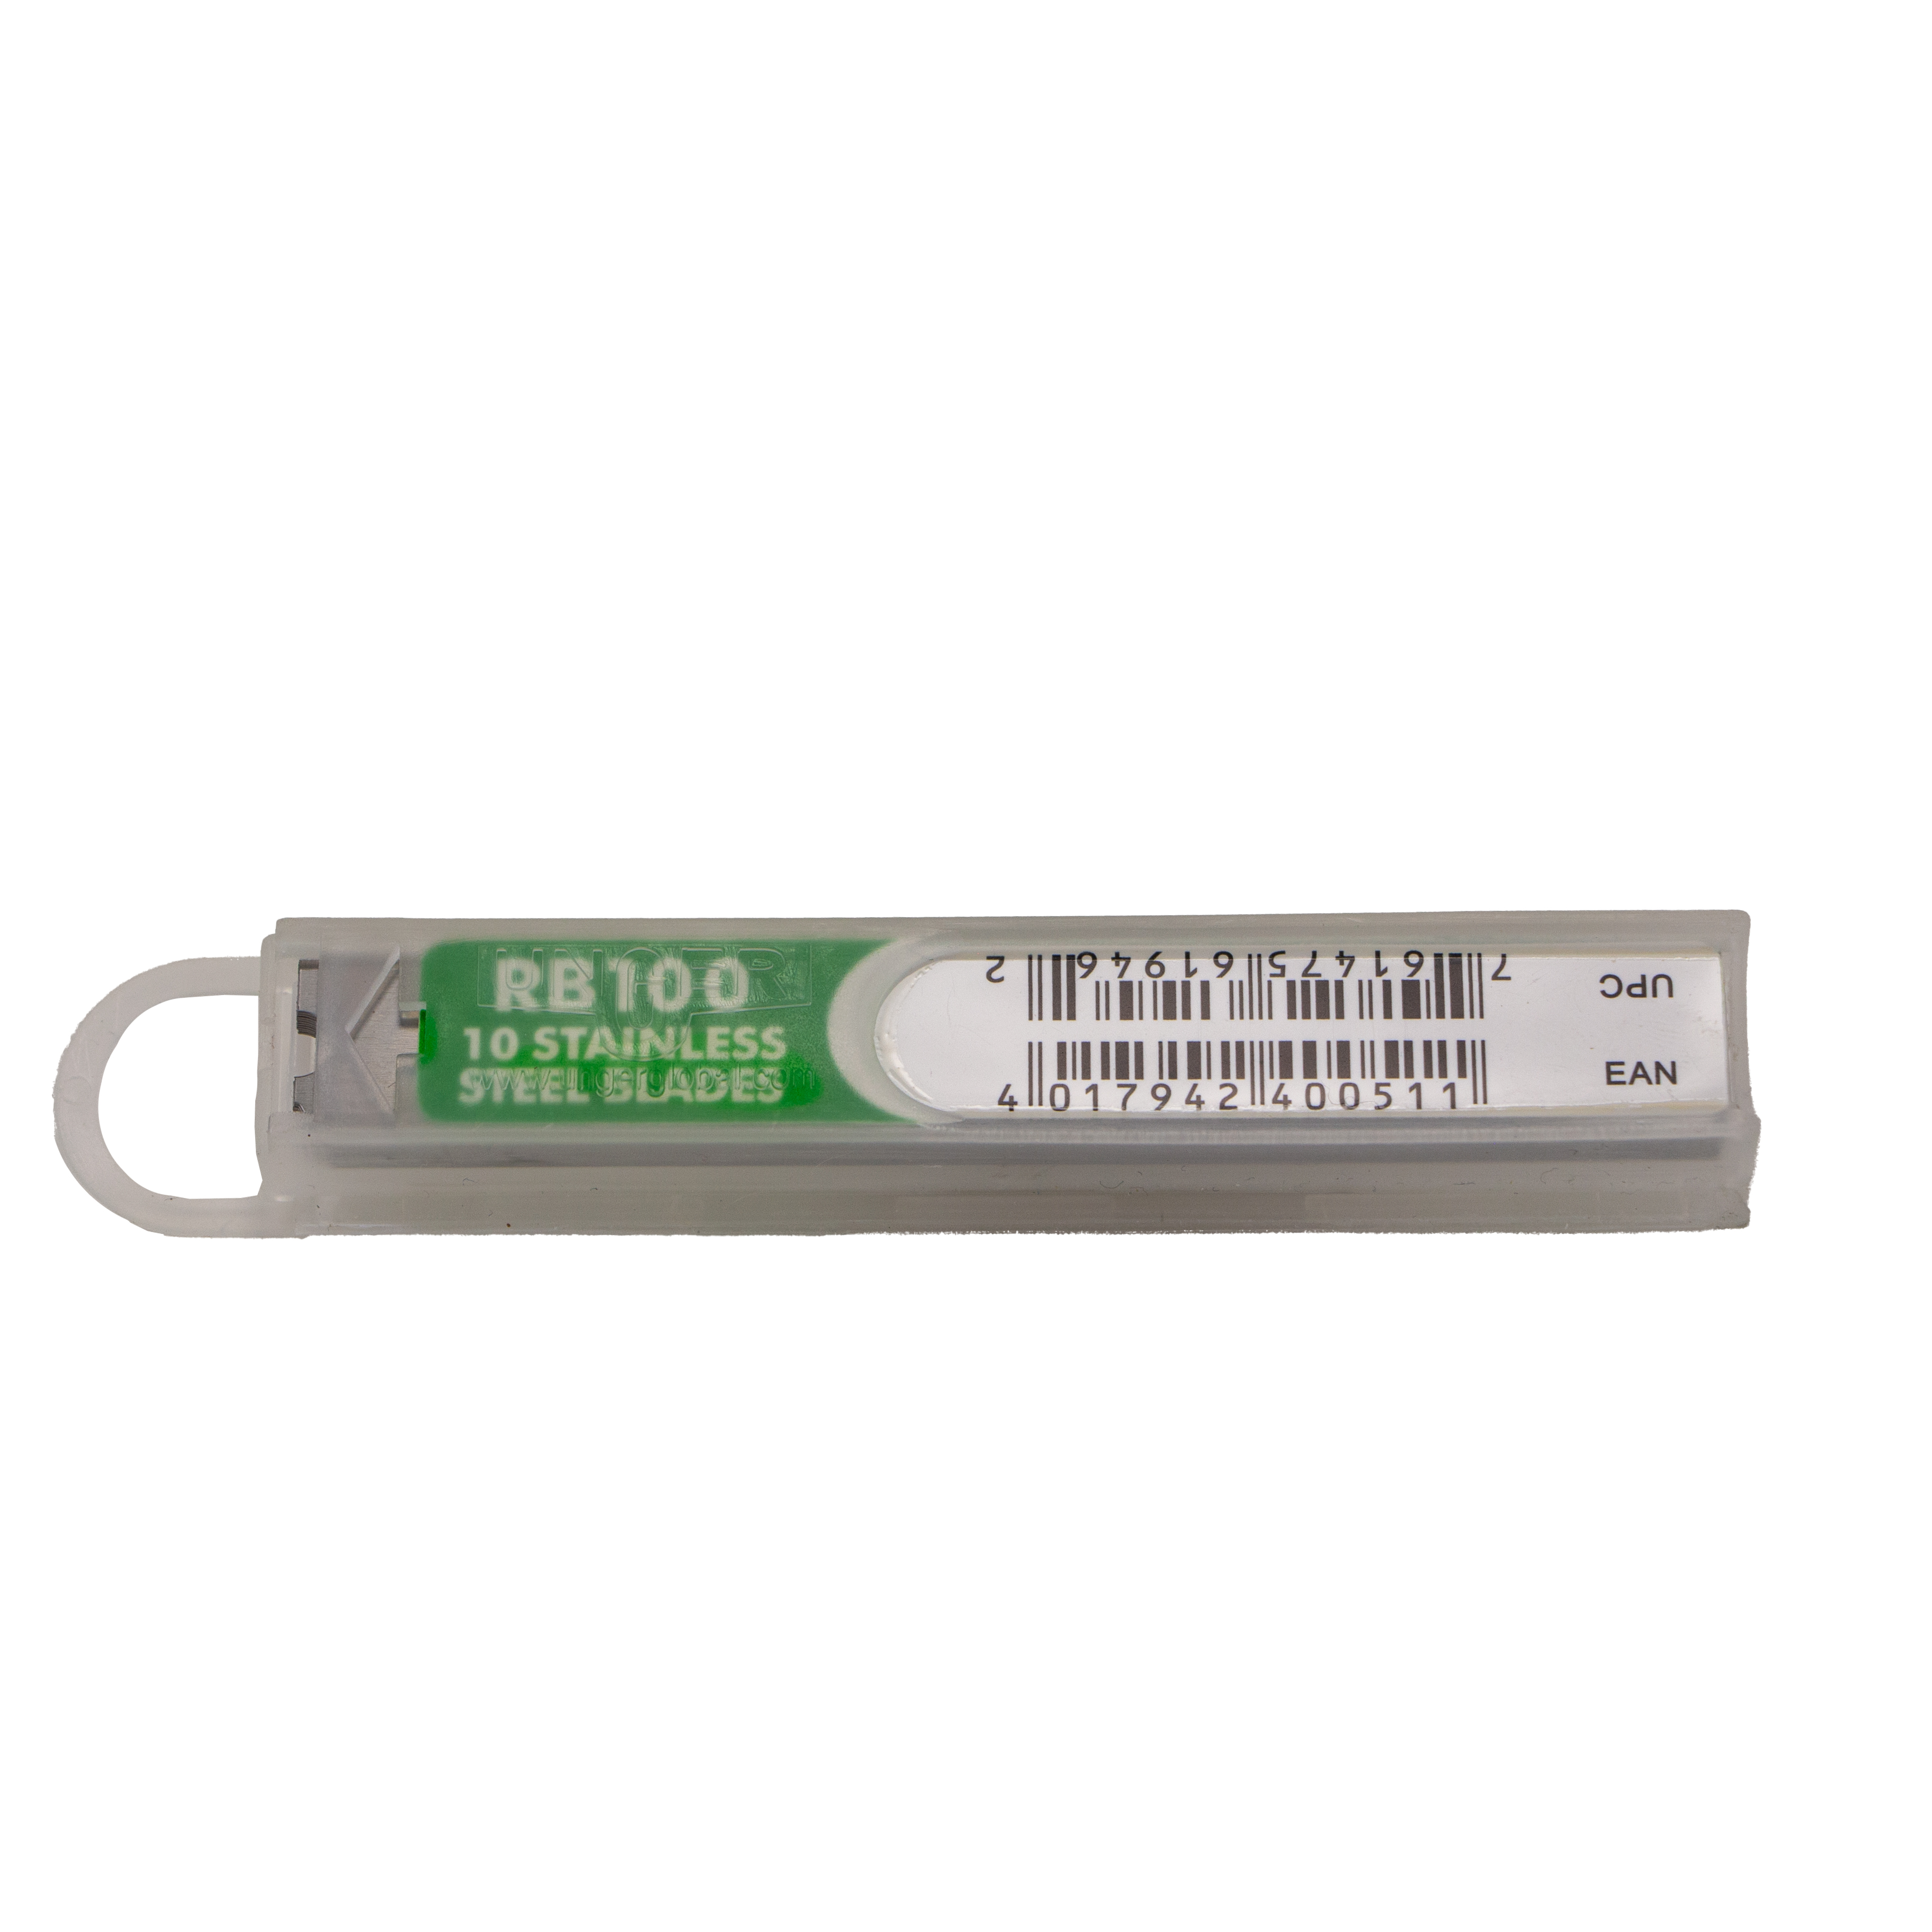 RB100_UE_Replacement_Blades_Stainless_Steel_Packshot_Independant_Dispenser